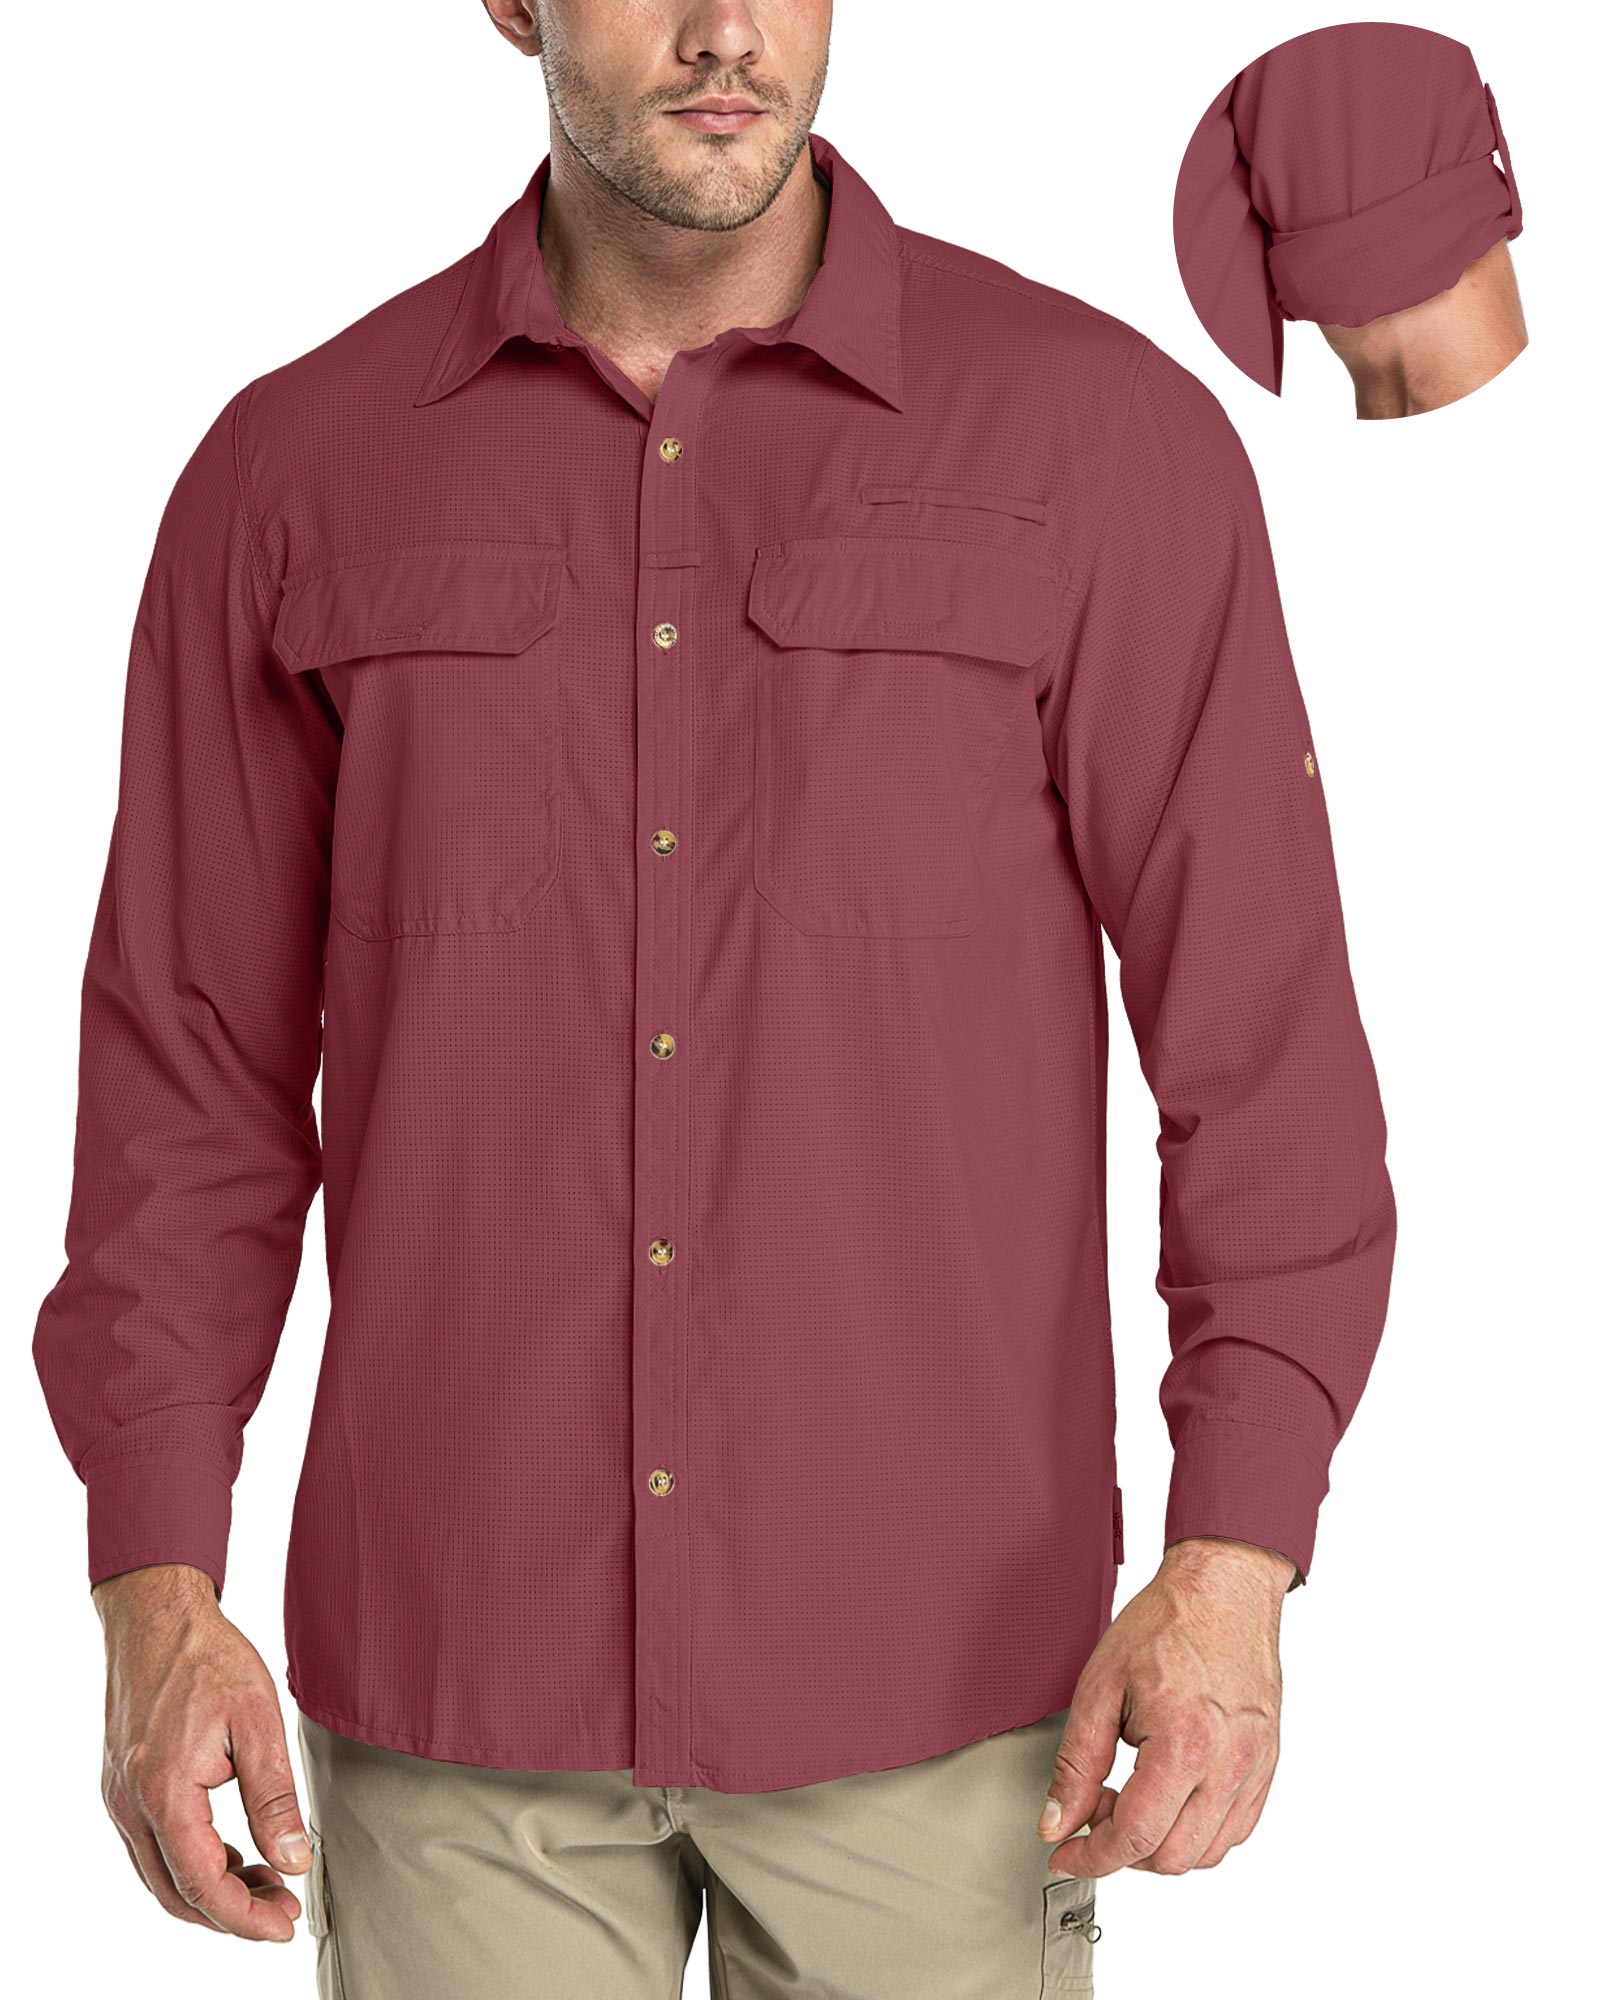 Men's Long Sleeve UPF 50+ GEO® Air-Hole Dry Cooling Shirts with Outdoo –  33,000ft